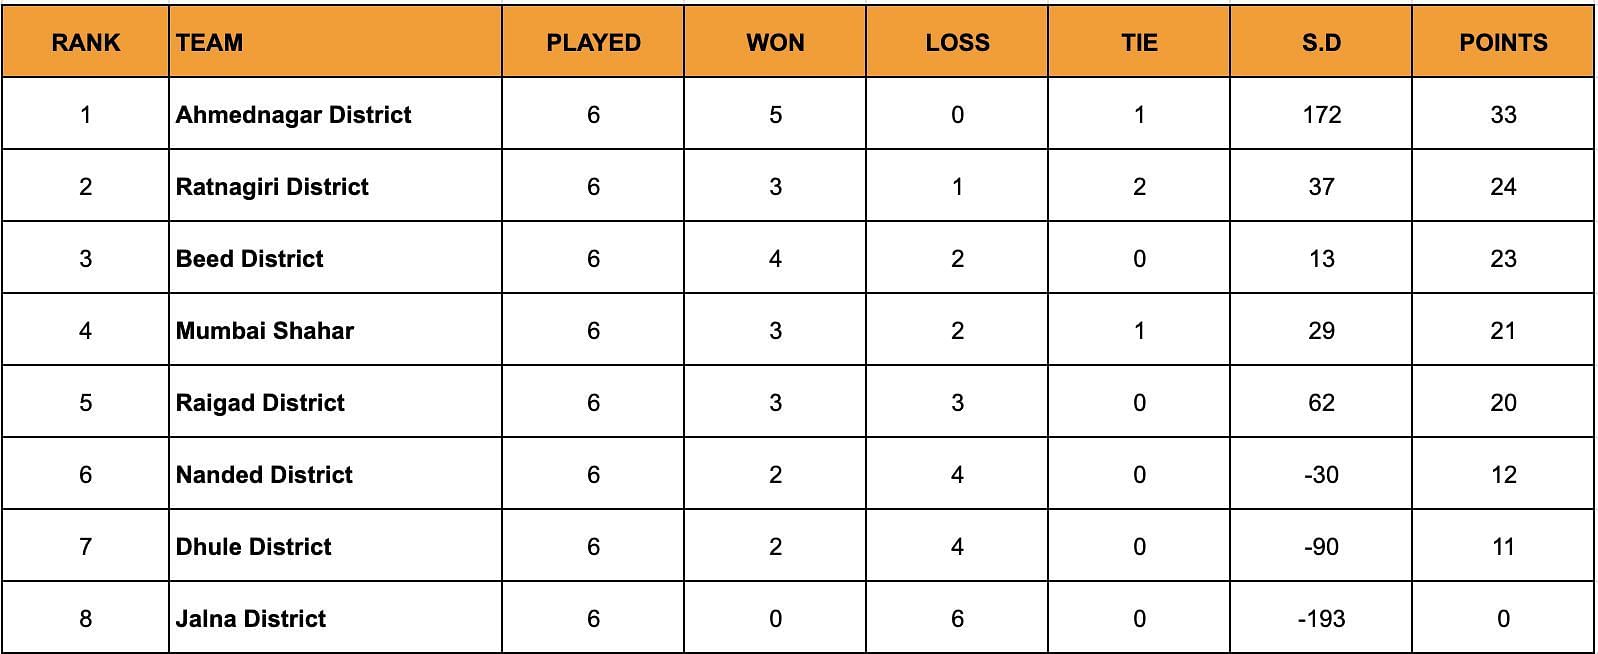 A look at the standings after the conclusion of Day 6.